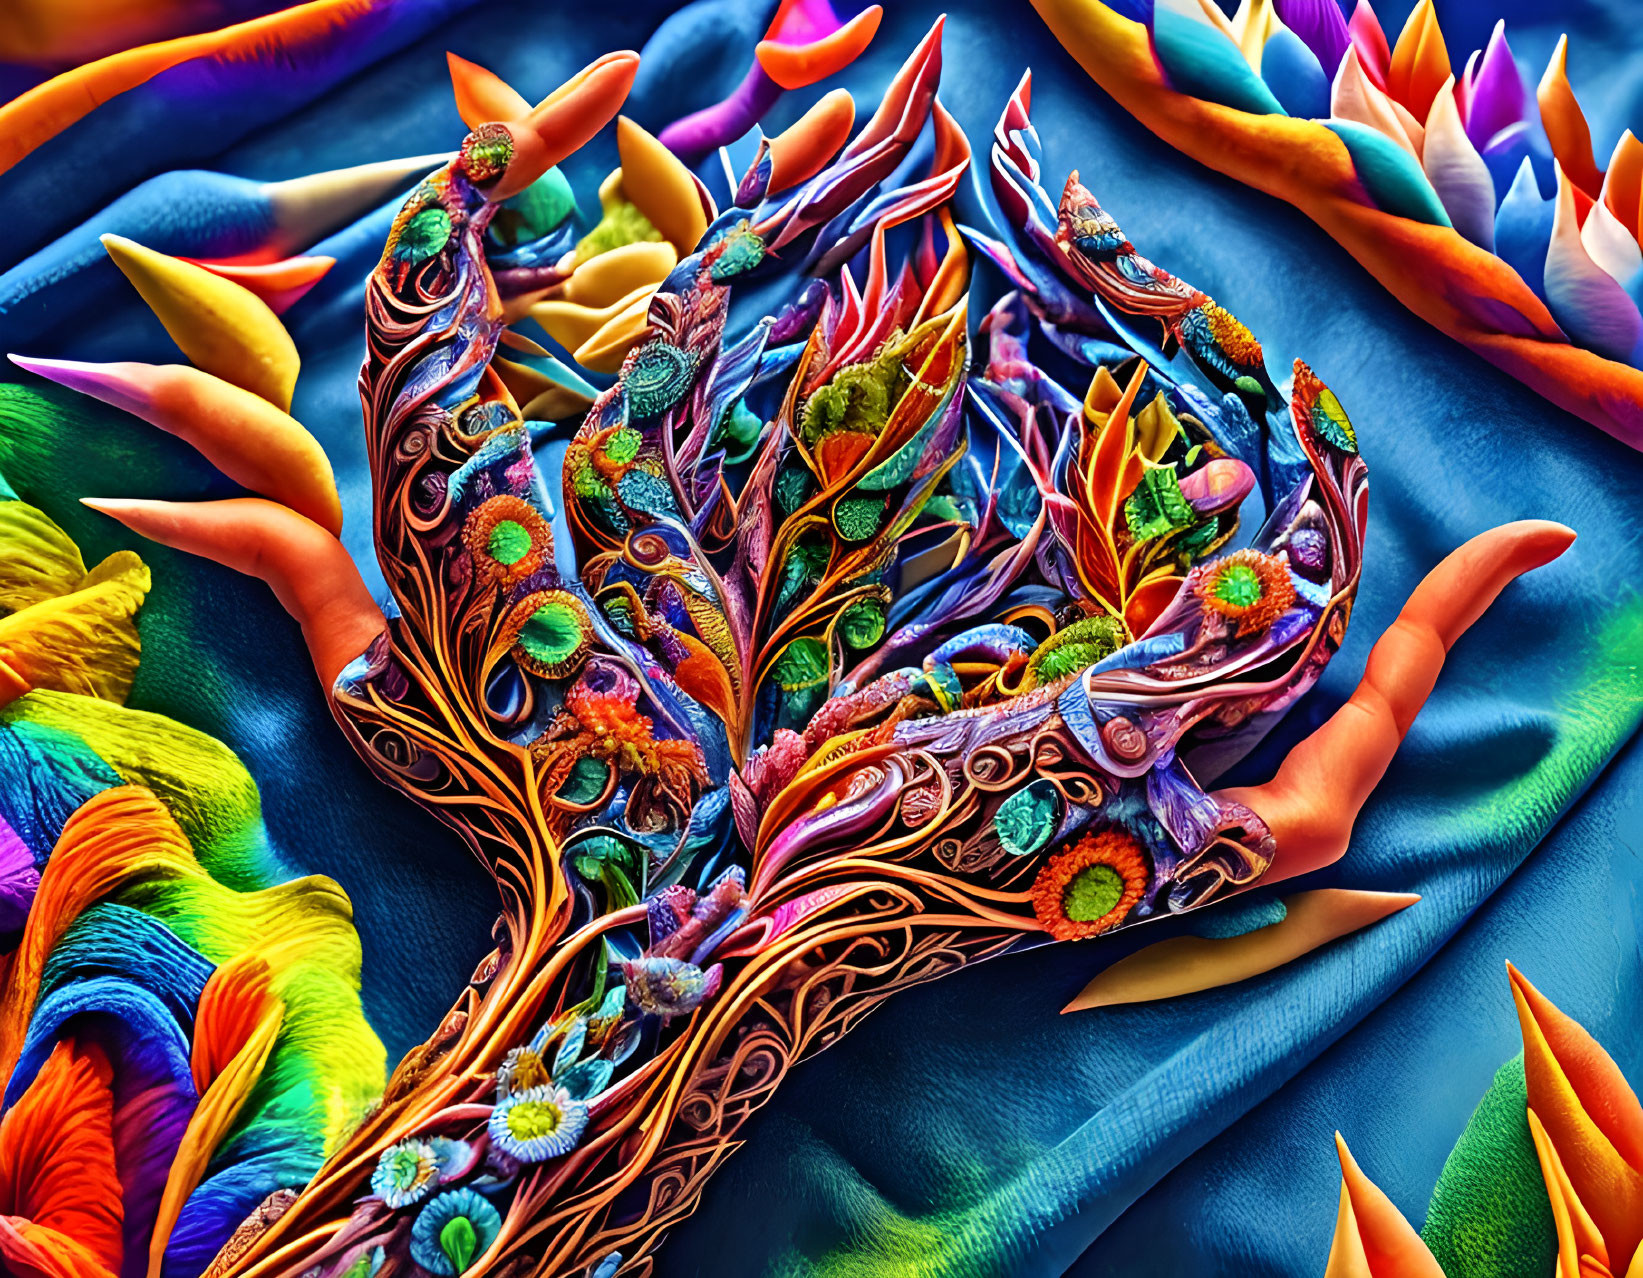 Colorful digital art: Hands releasing leaves and feathers on rainbow backdrop